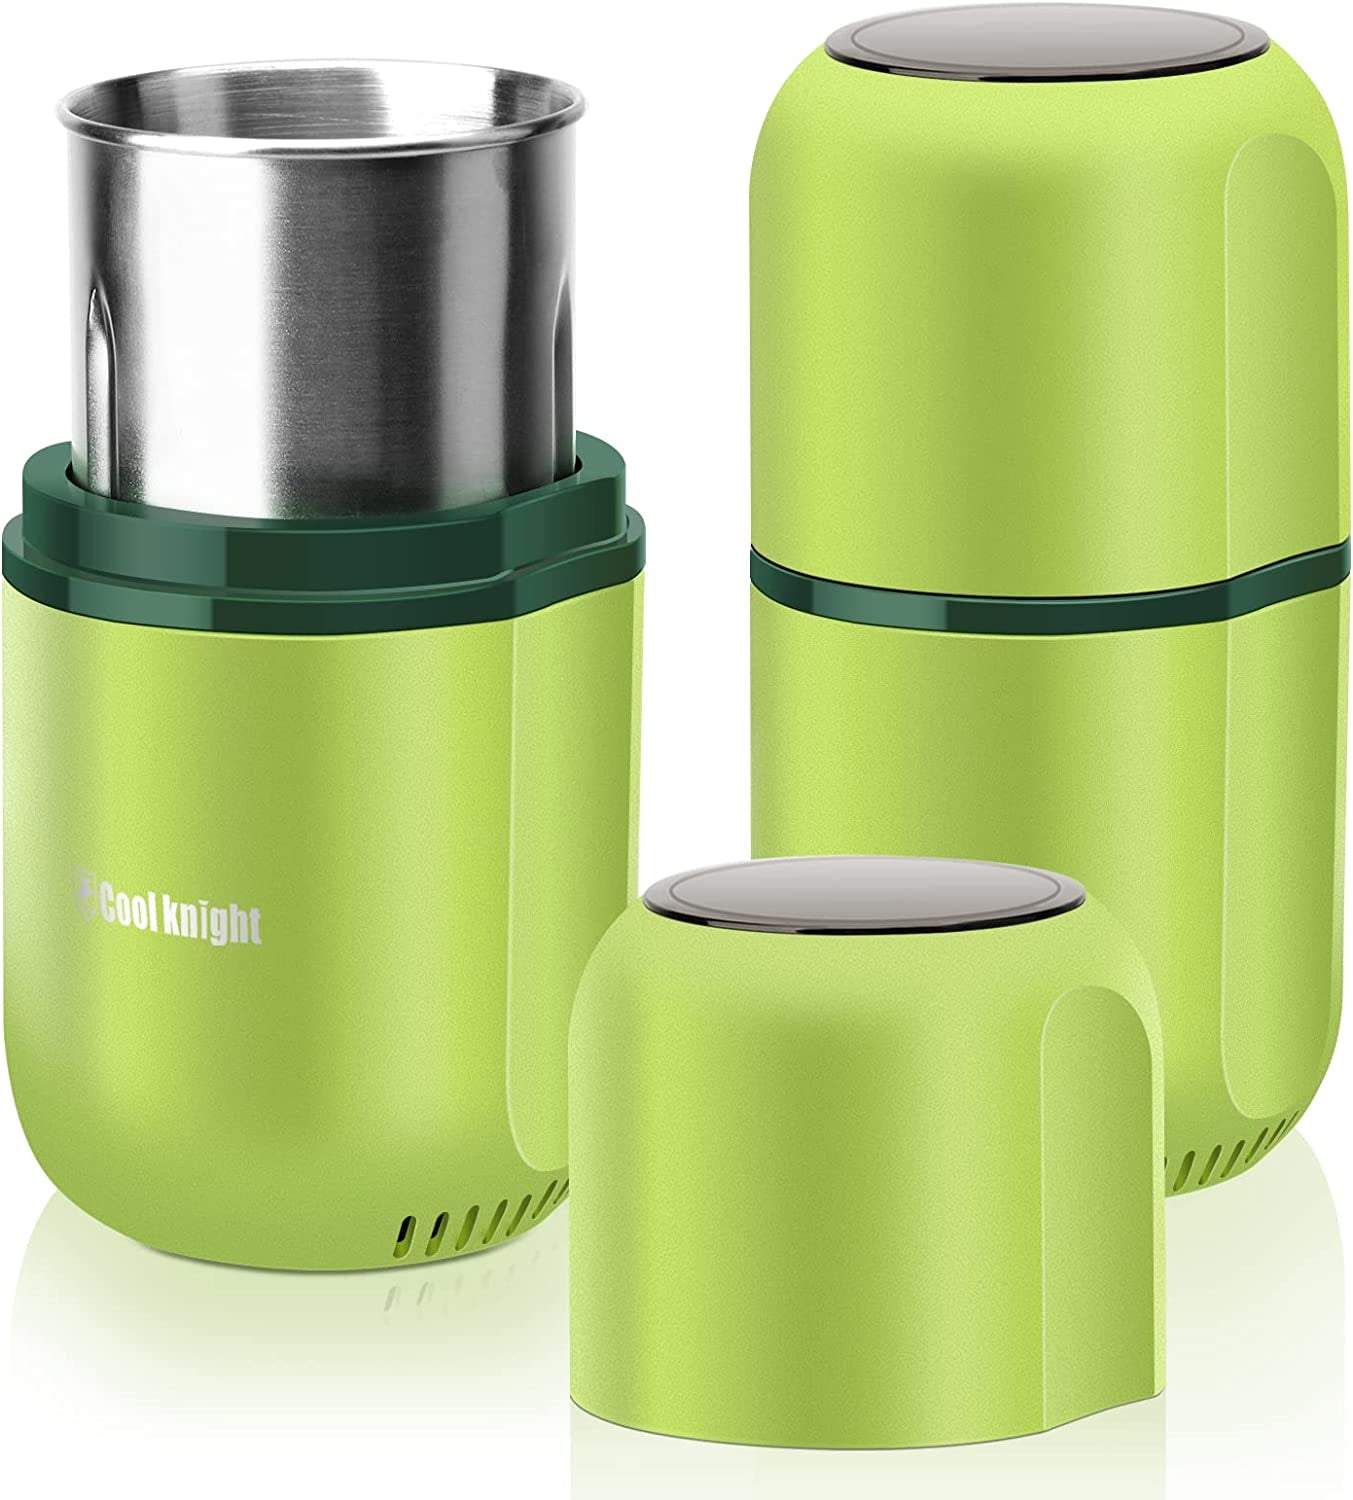 Large Capacity Electric Herb, Spice, & Coffee Grinder with Pollen Catcher